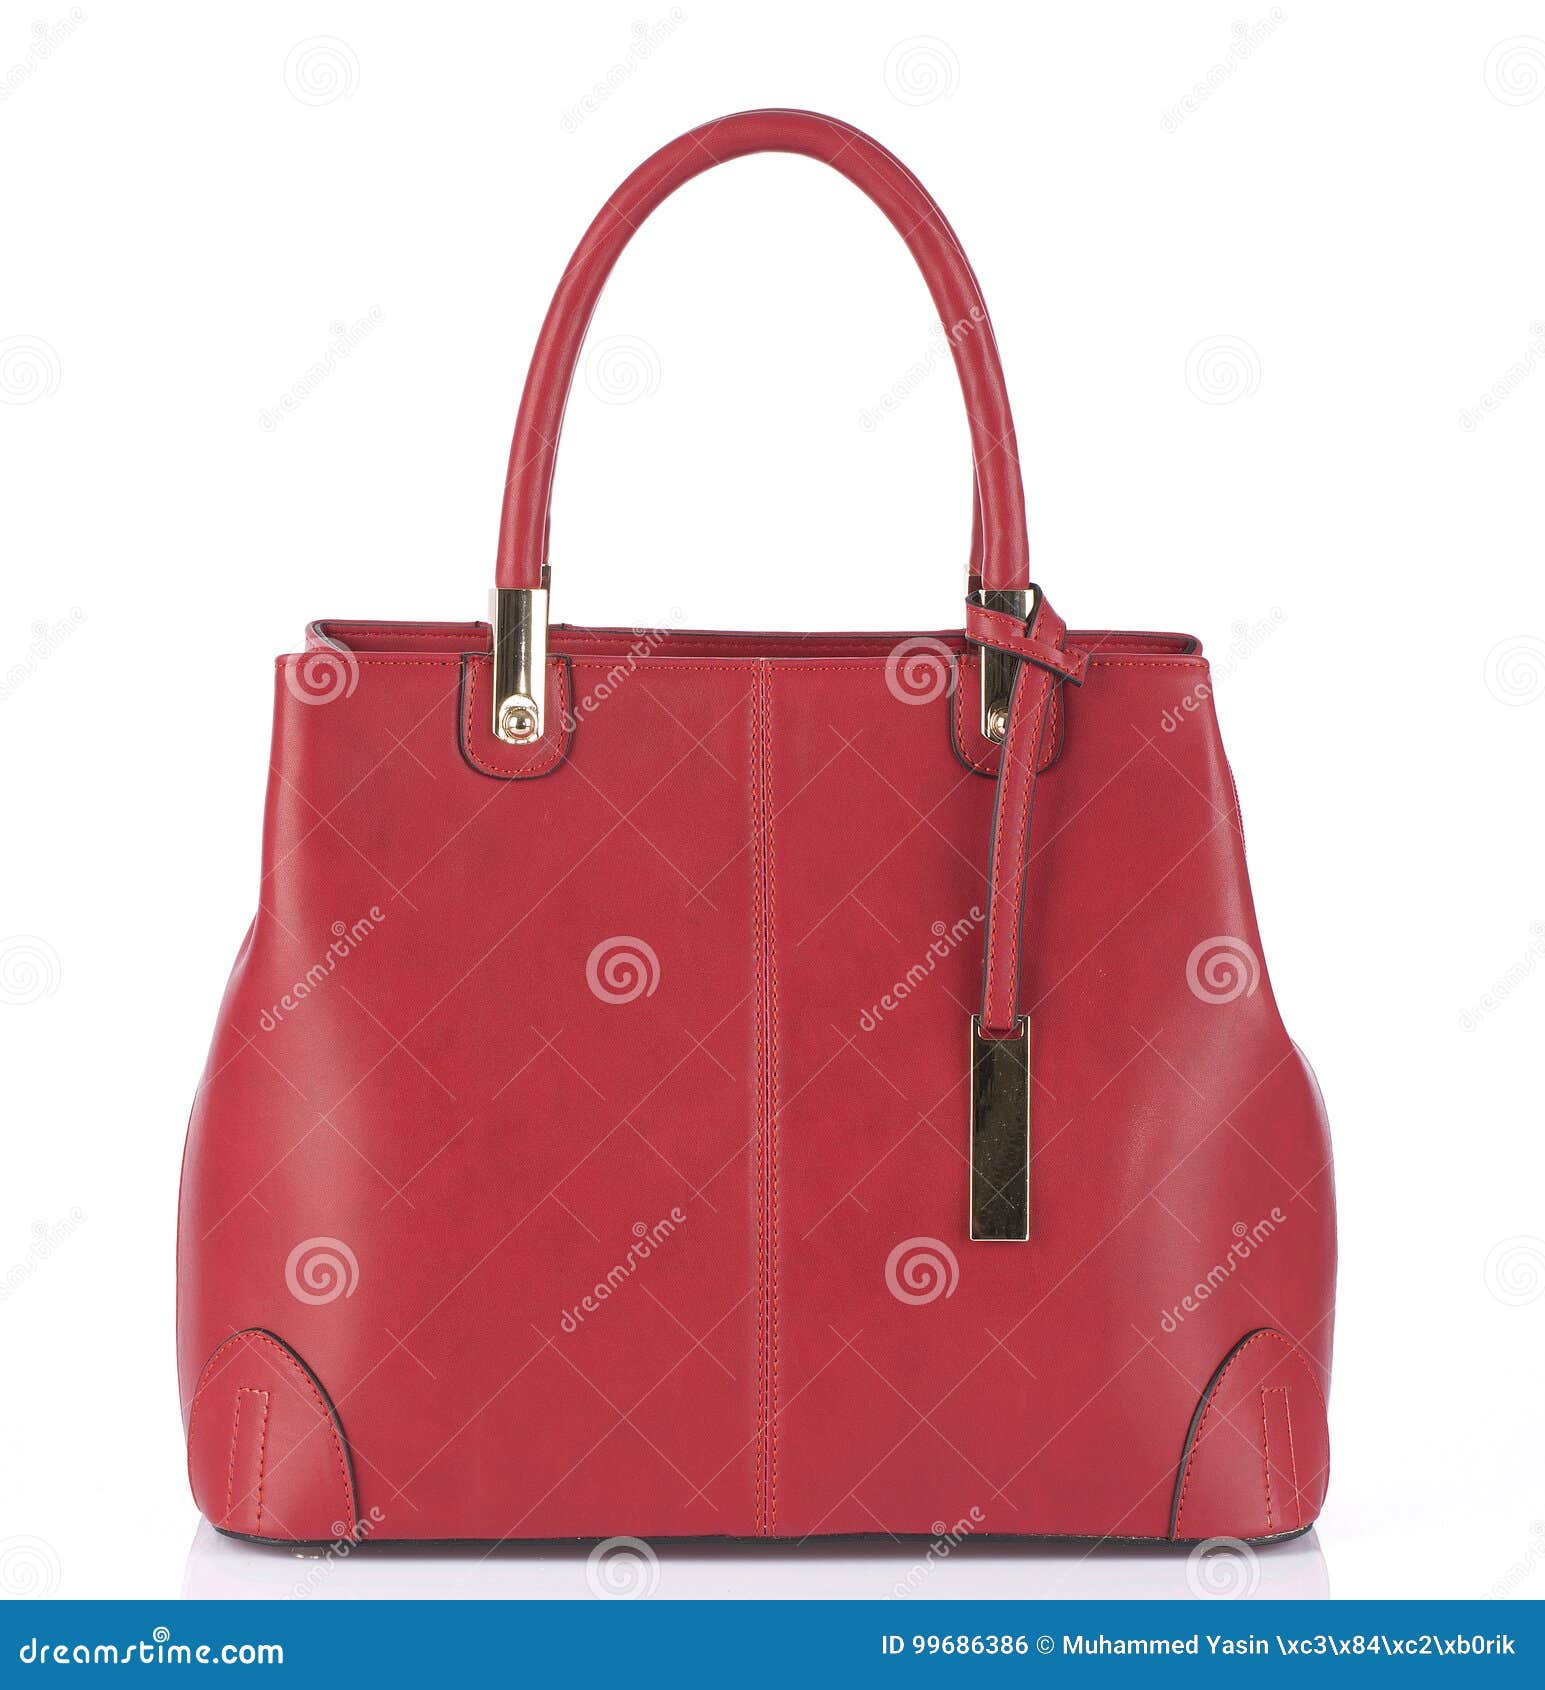 Red Woman Leather Handbag Isolated on White Background Stock Photo ...